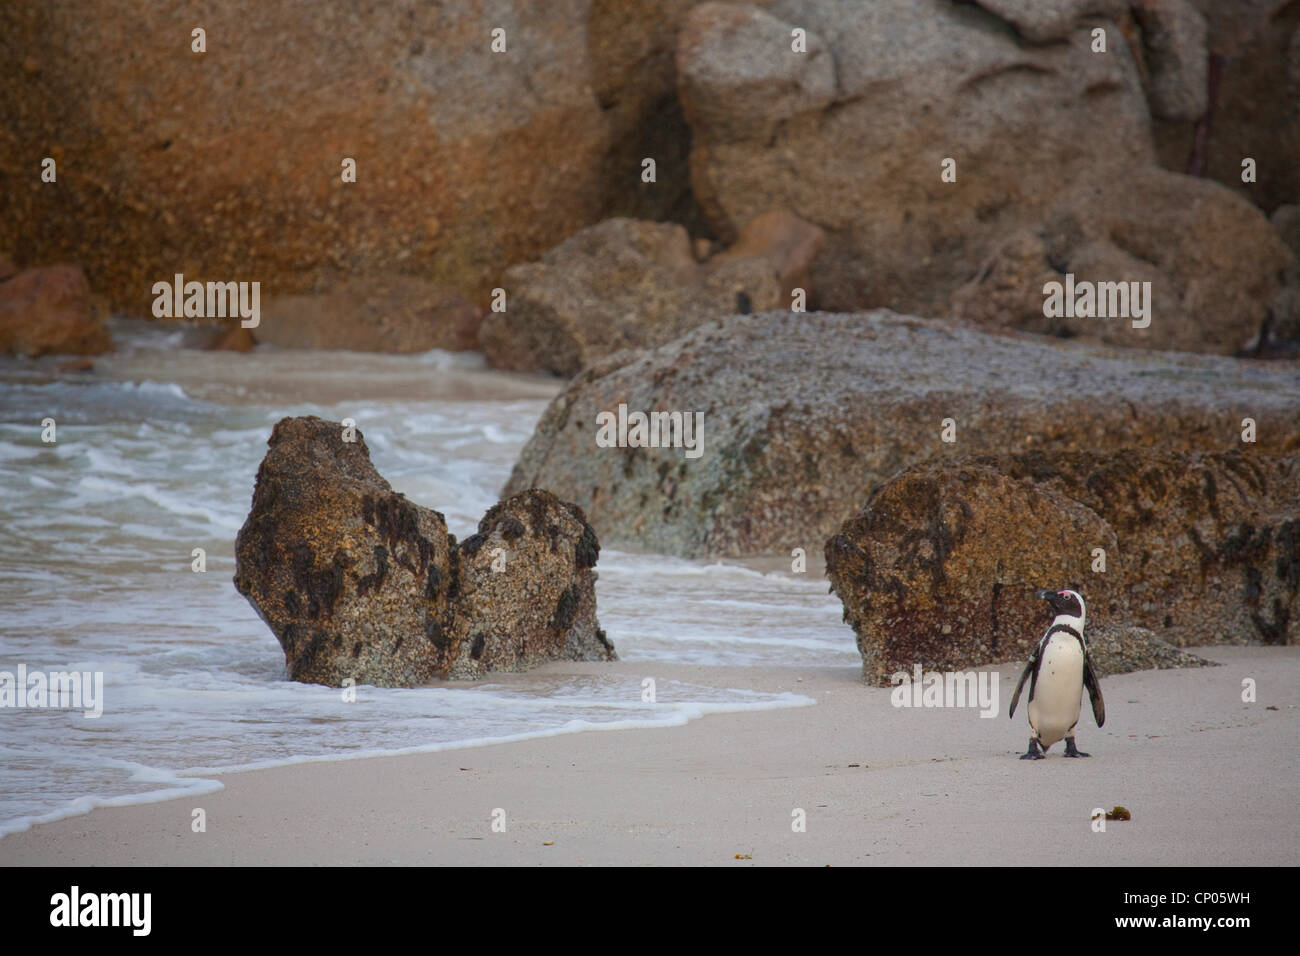 jackass penguin, African penguin, black-footed penguin (Spheniscus demersus), on the beach, South Africa, Western Cape, Boulders Beach, Simons Town Stock Photo